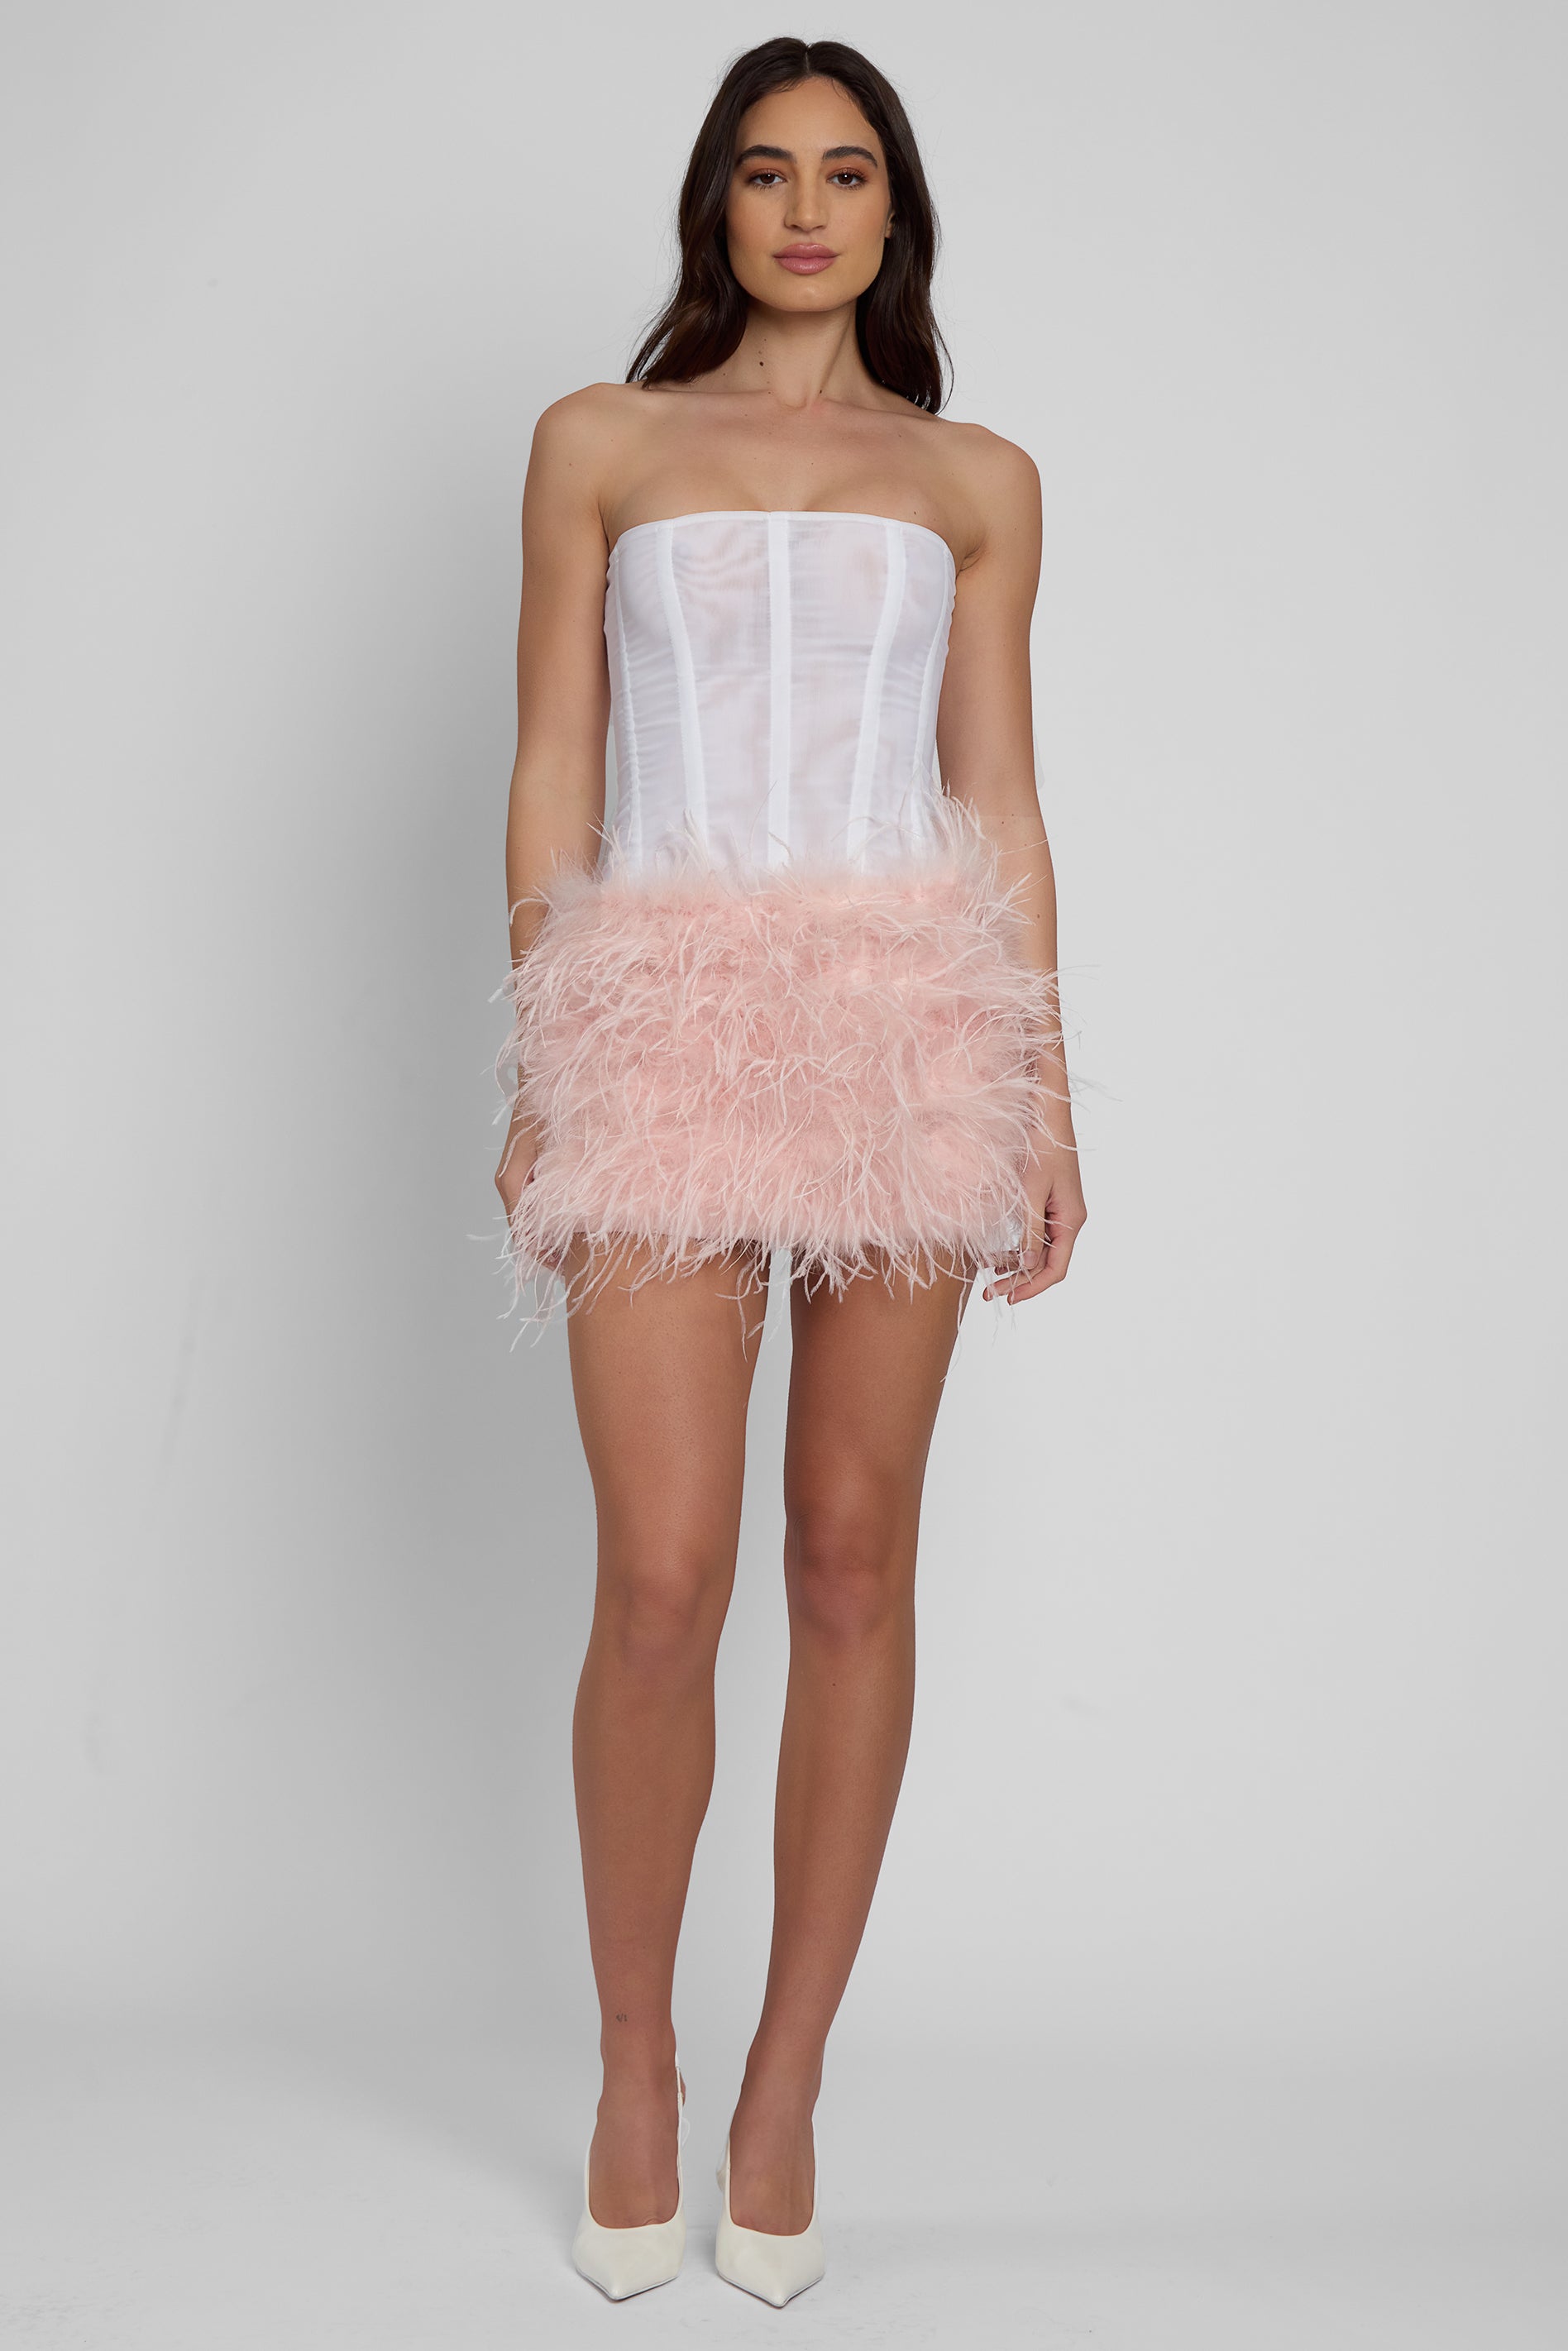 Cloud Feather Mini Skirt - Pink.